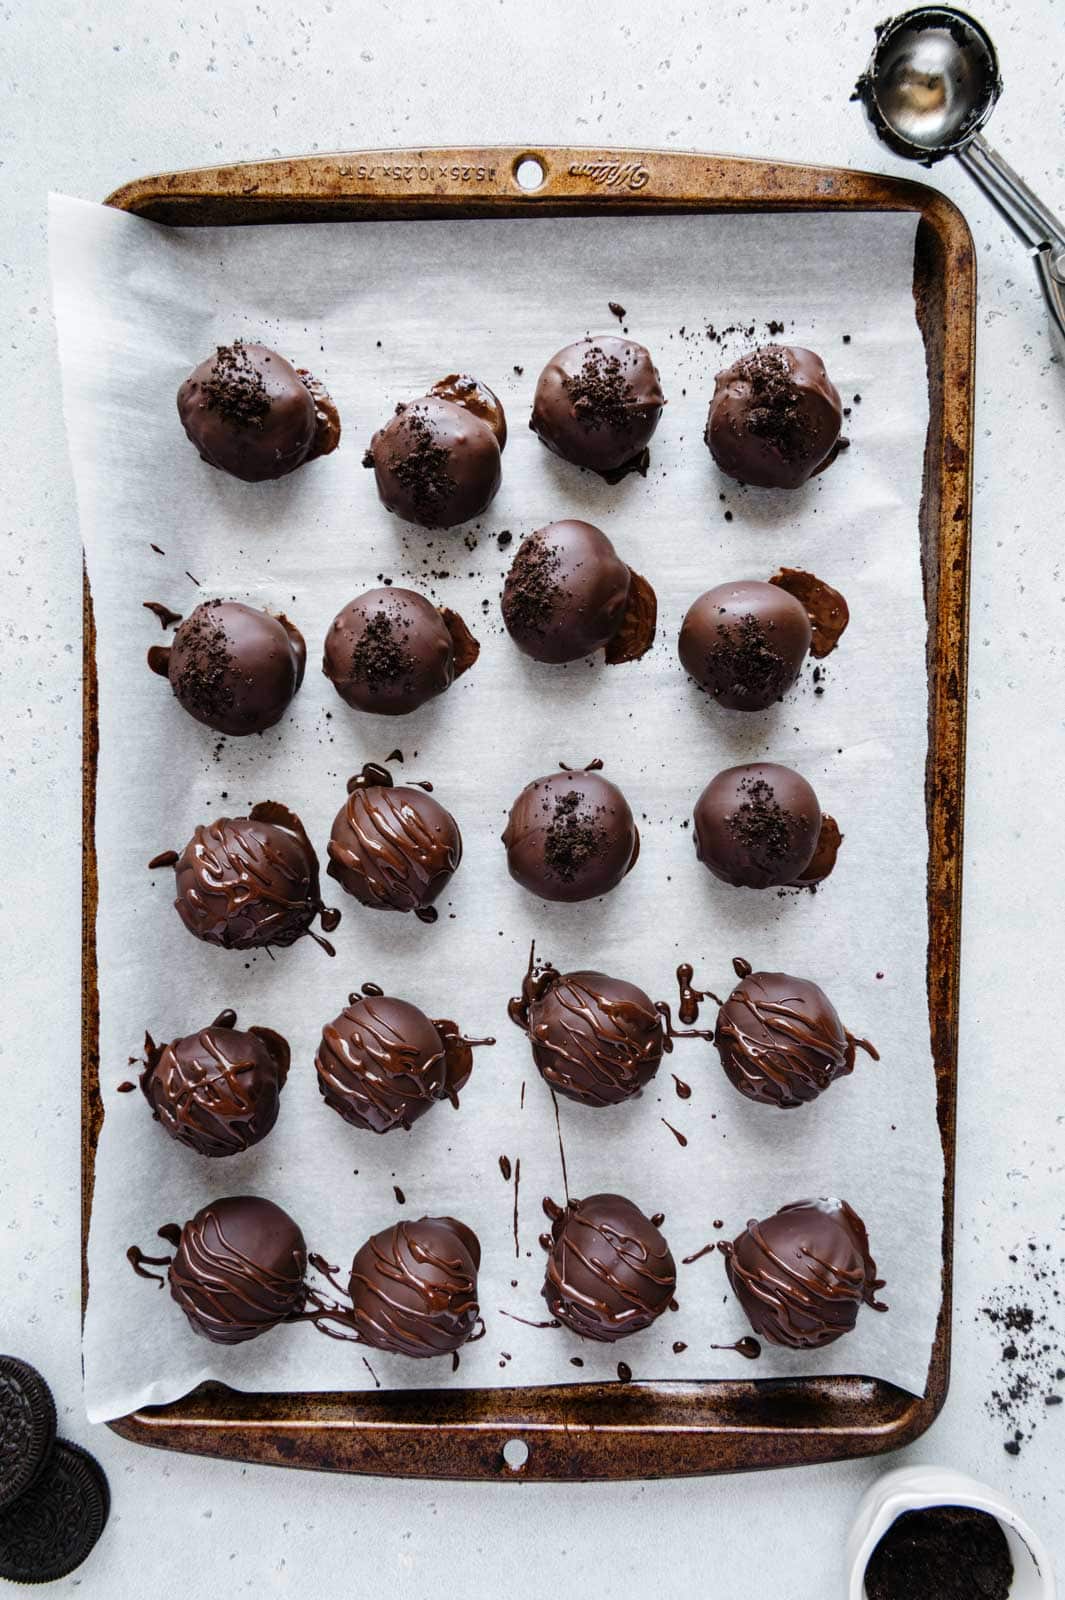 Oreo truffles drizzled with chocolate and crushed Oreos on a baking tray.